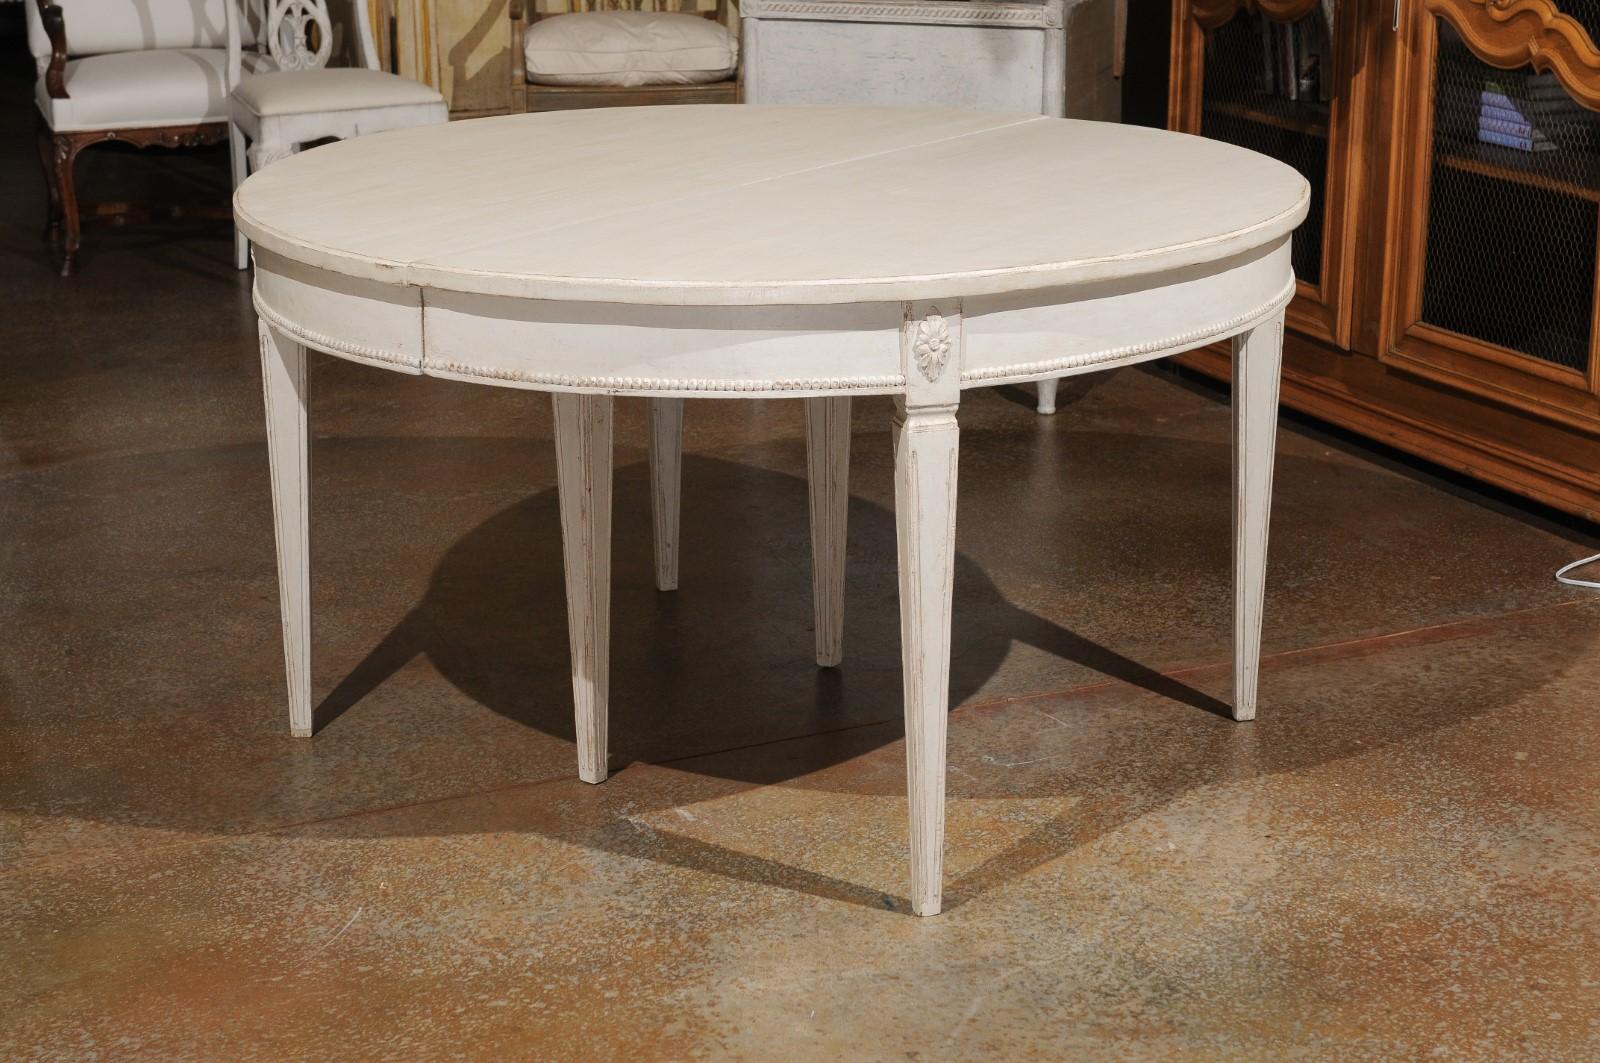 Swedish Painted Oval Dining Room Table with Four Leaves, Rosettes and Beading 1